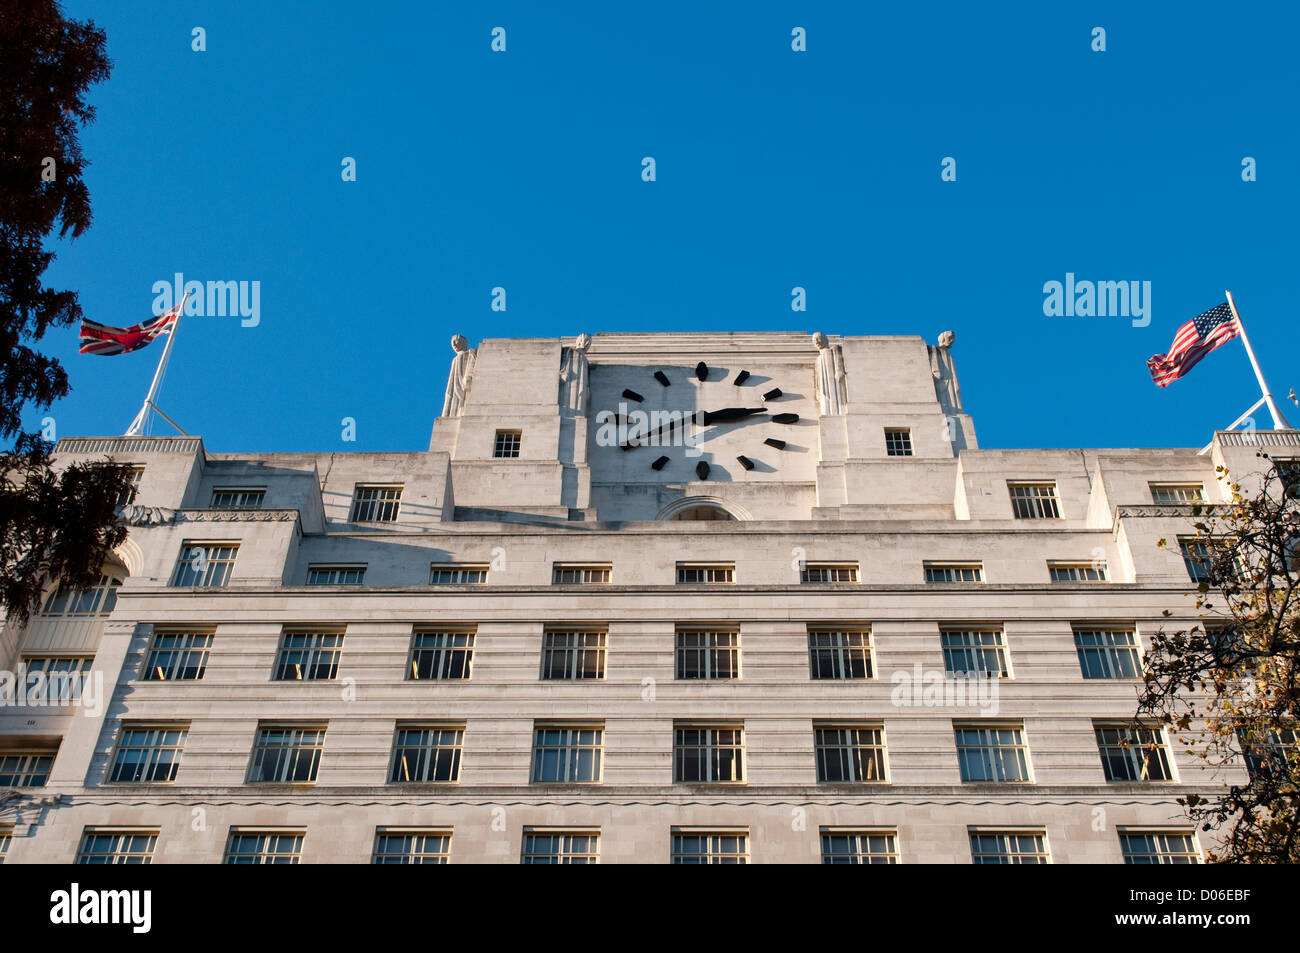 Shell Mex House, 80 Strand, Victoria Embankment, London, UK Banque D'Images